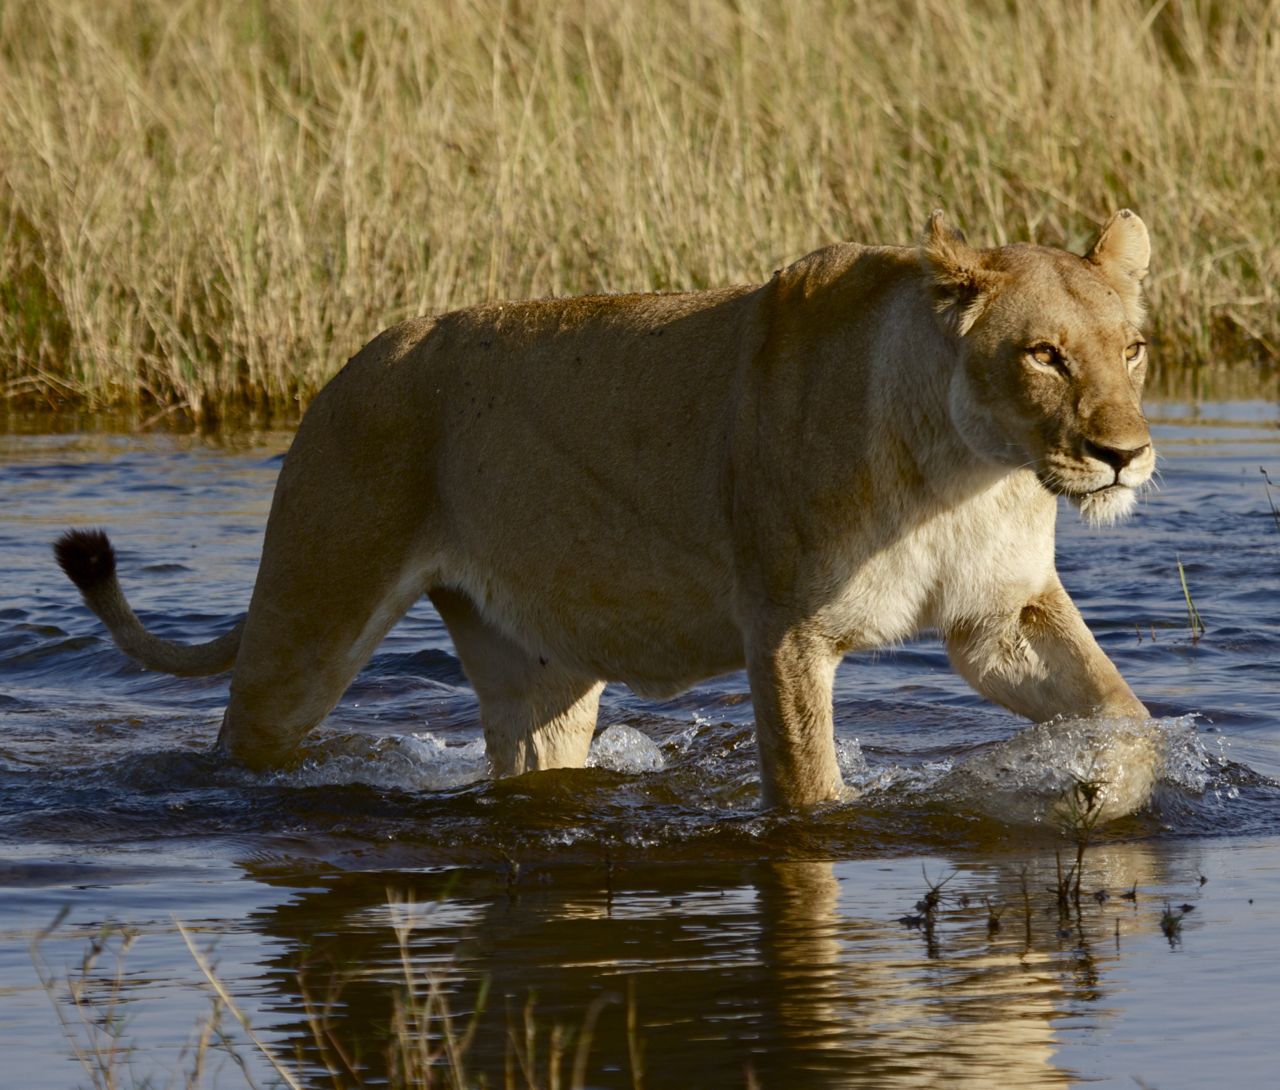 The lions of the Okavango Delta are adept at living in a watery environment